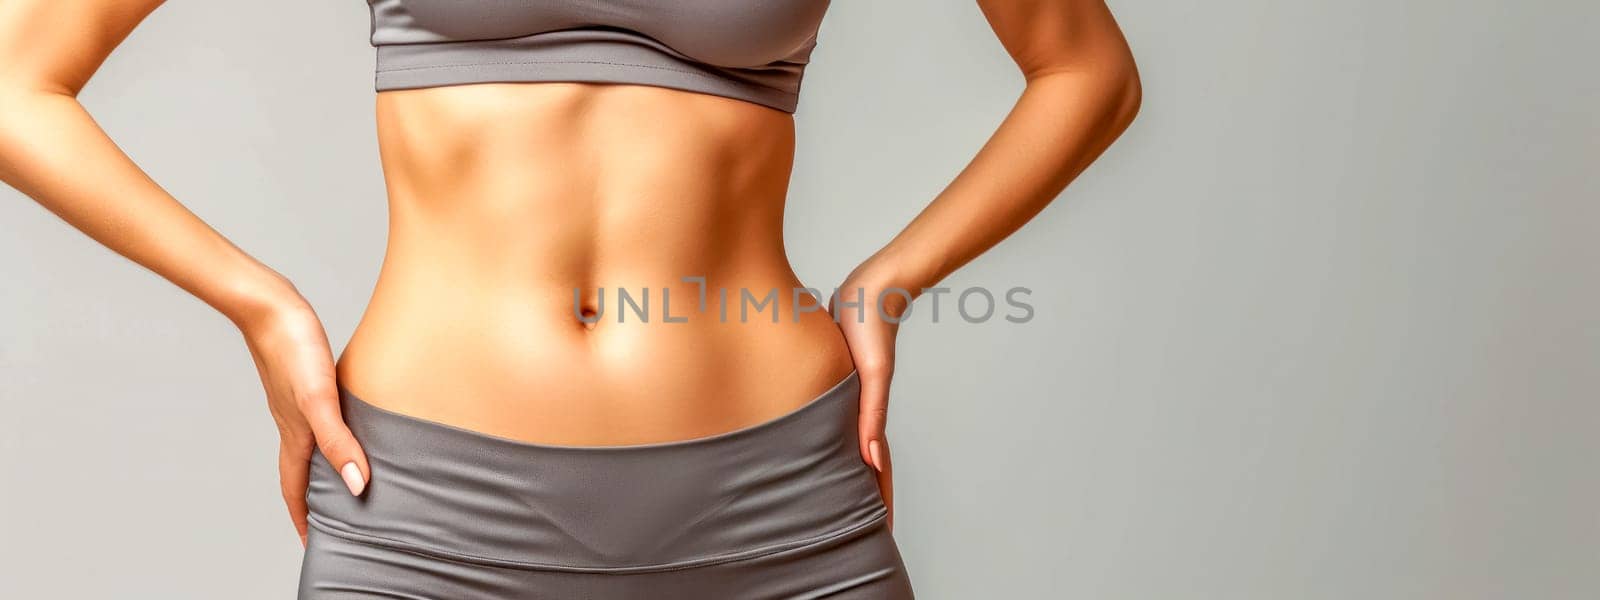 fit female body dressed in a grey crop top, highlighting a slim waist, toned abdomen, and healthy skin, set against a neutral background, suitable for health and fitness themes by Edophoto